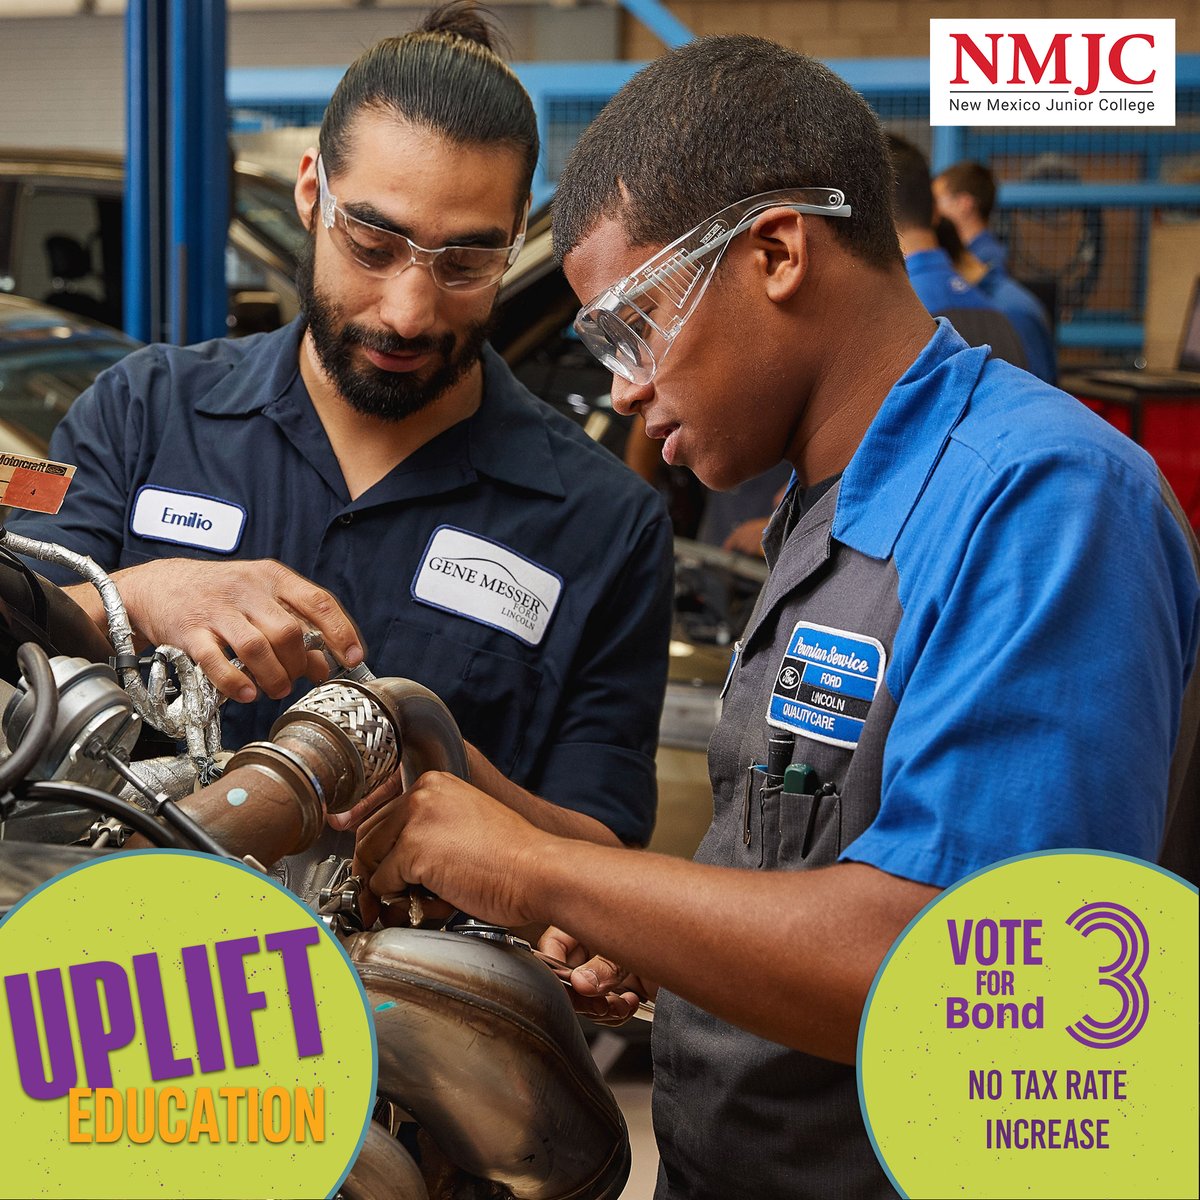 NMJC is seeking GO Bond Funds for a new vocational trades building. The energy sector is seeing an increase in demand for high-value occupations and the new facility would allow expanded training capacity. Click the link to learn more. 🔗 bond3fornm.com #Bond3ForNM